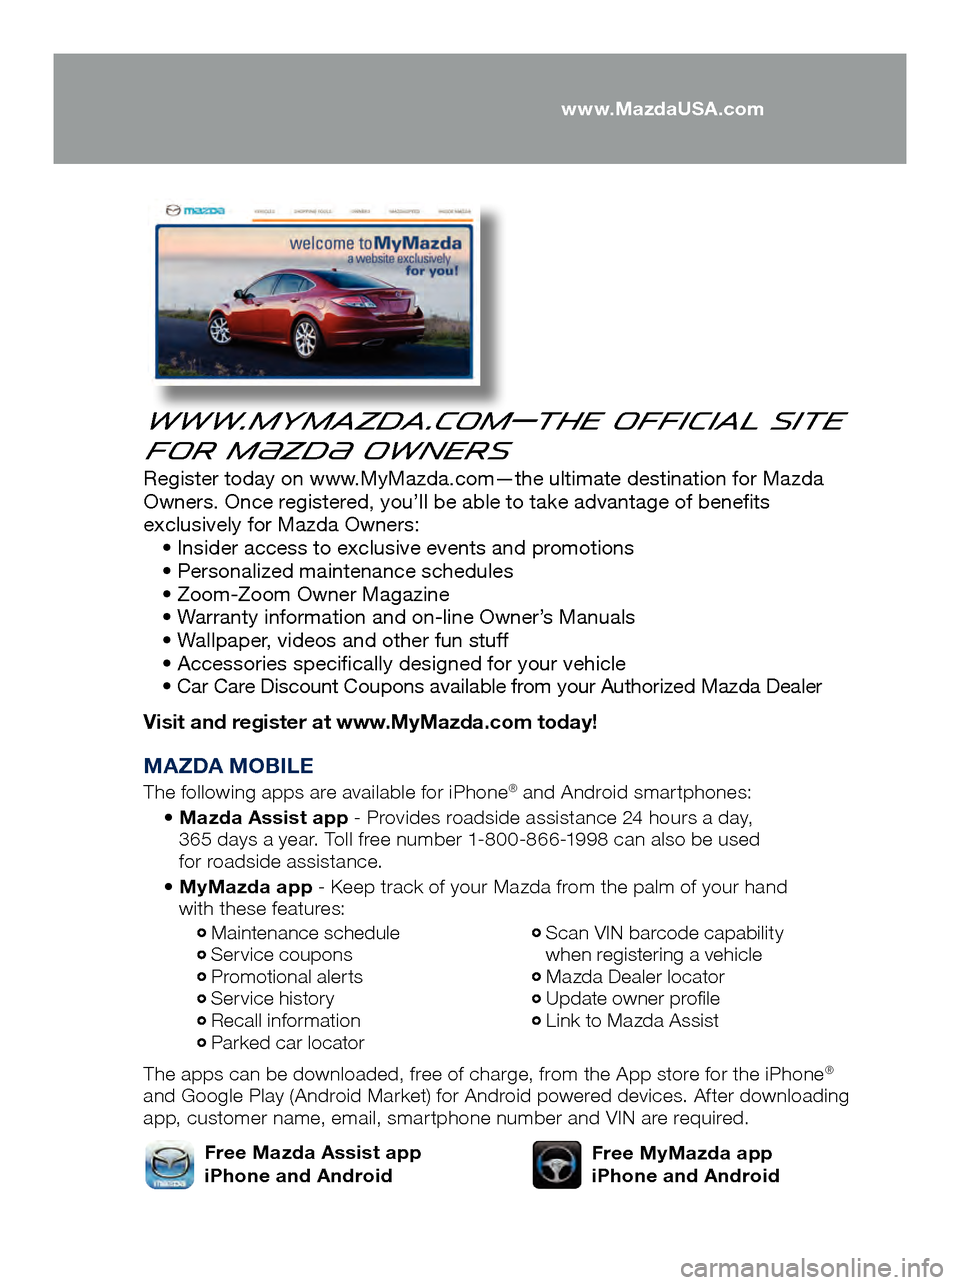 MAZDA MODEL 6 2017  Quick Start Guide (in English) www.MyMazda.com—The Official Site 
for M{zd{ Owners
Register today on www.MyMazda.com—the ultimate destination for Mazda 
Owners. Once registered, you’ll be able to take advantage of benefits 
e